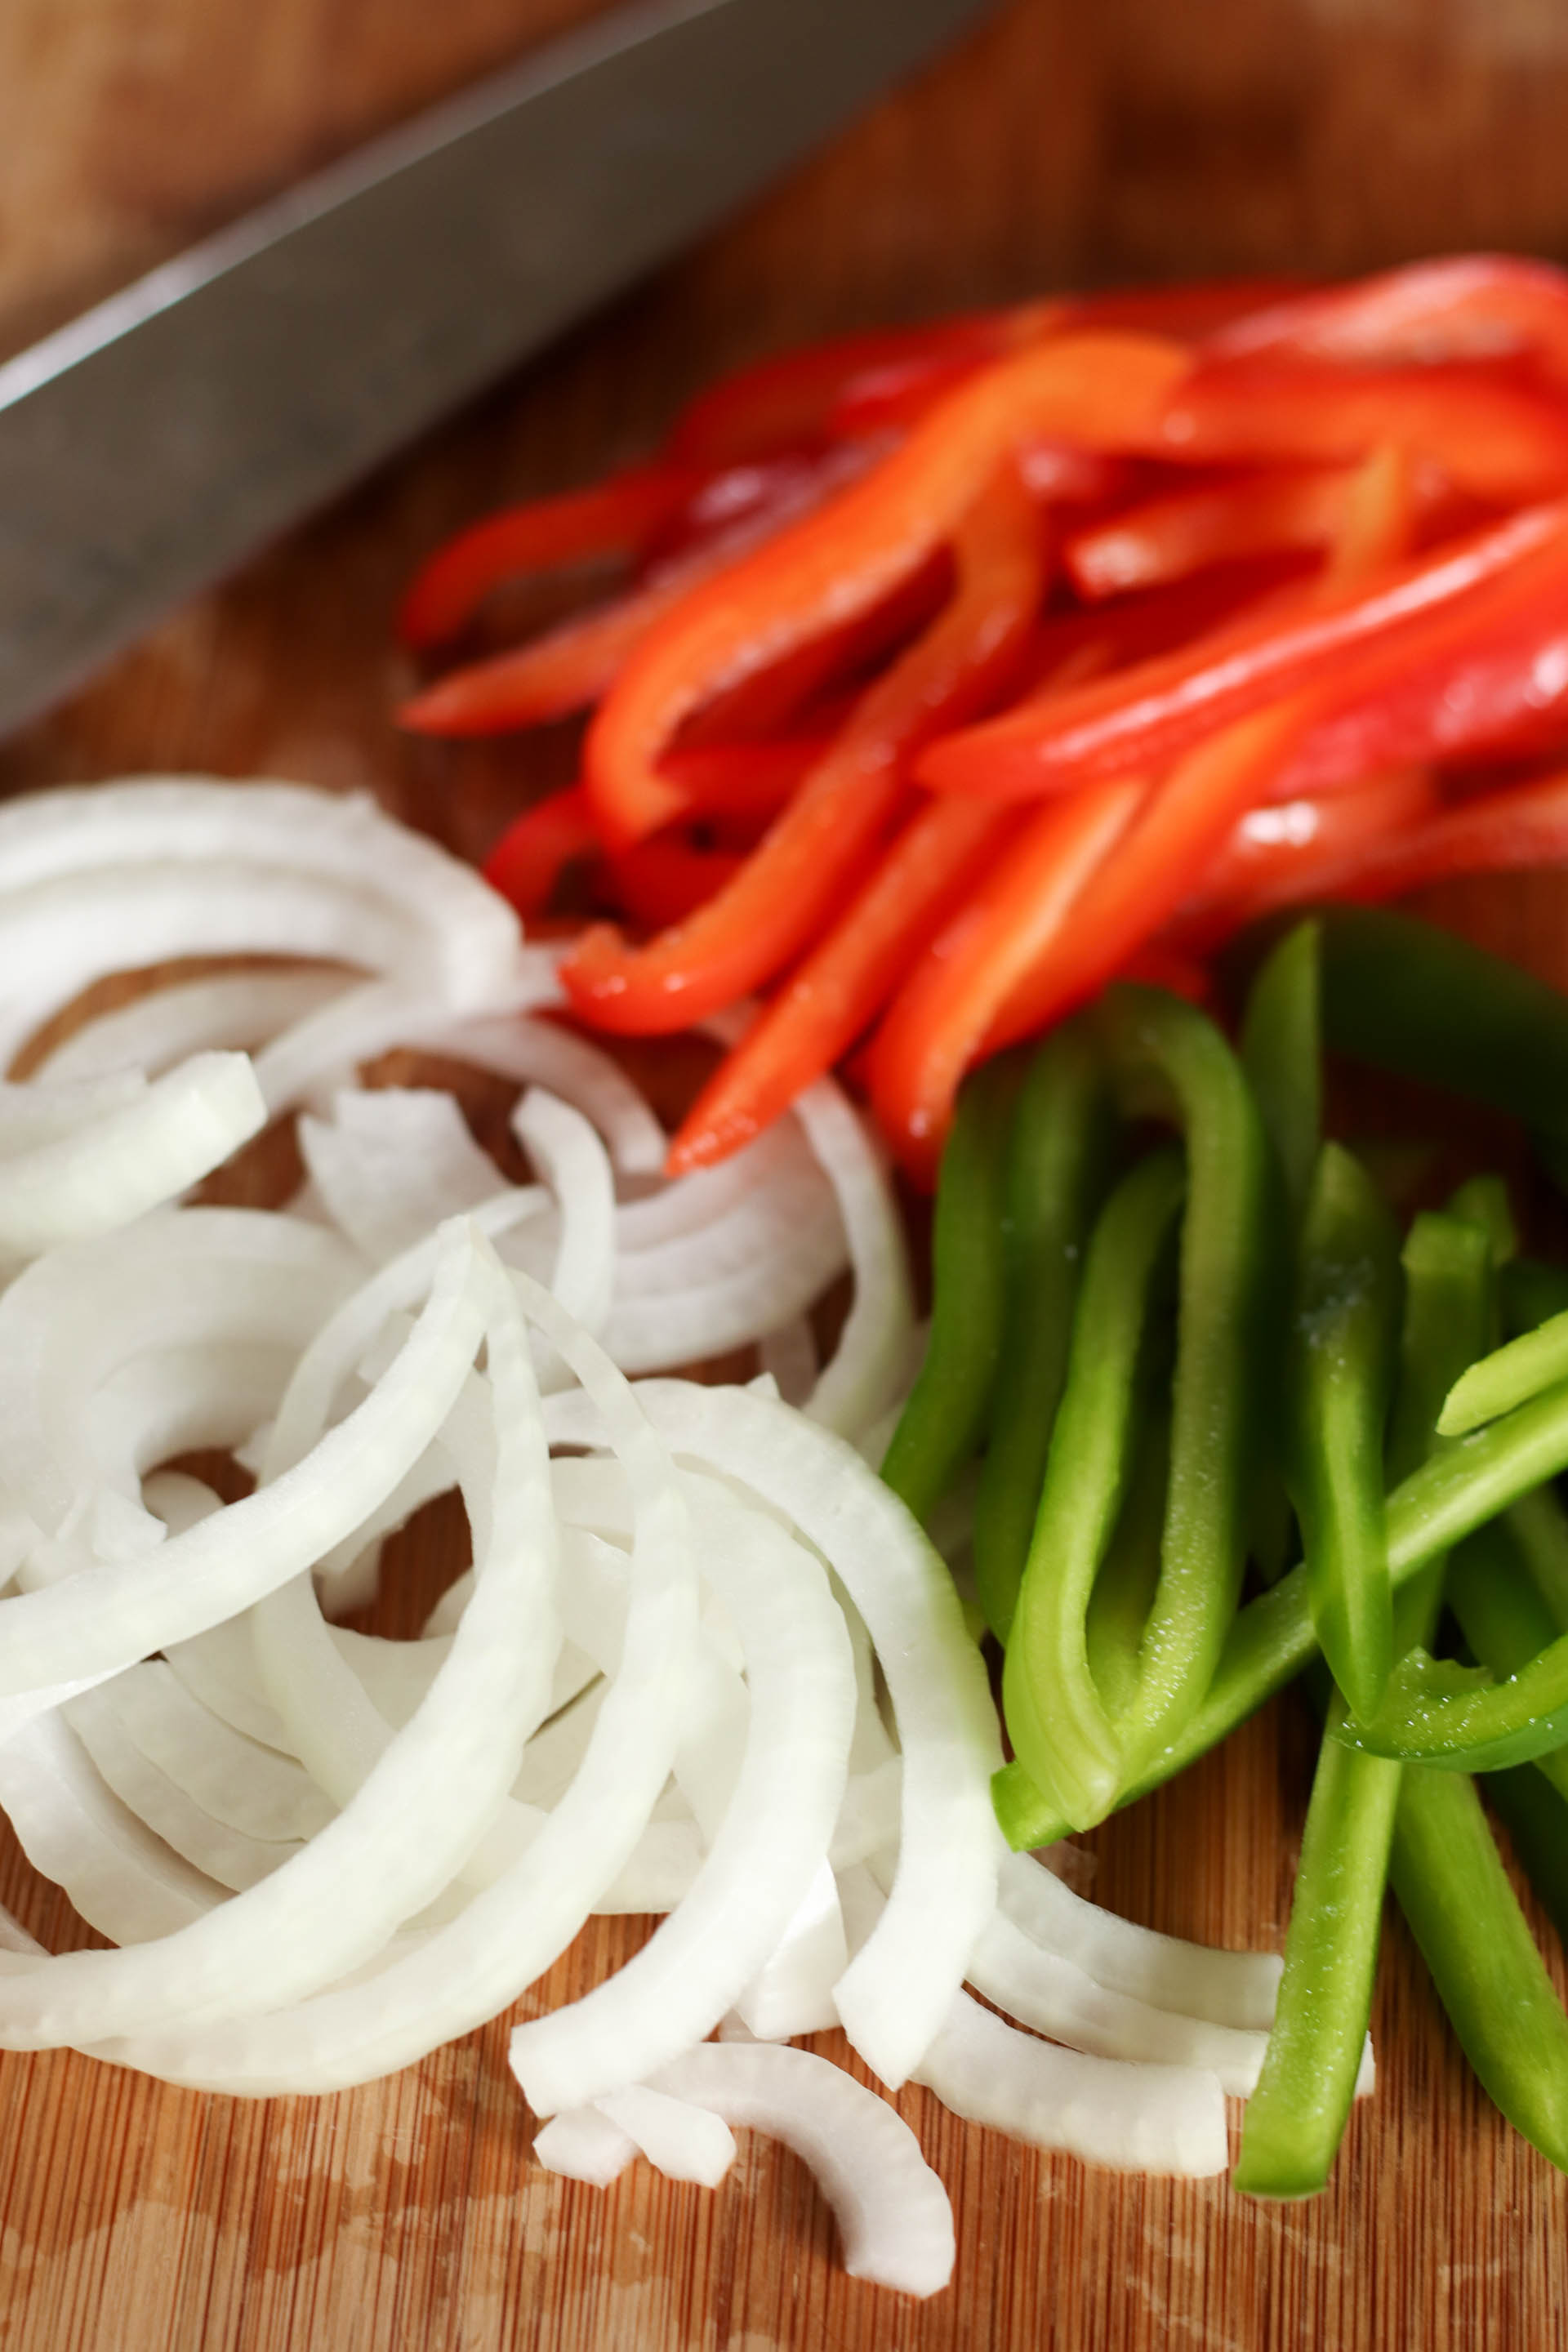 Sliced onions and peppers